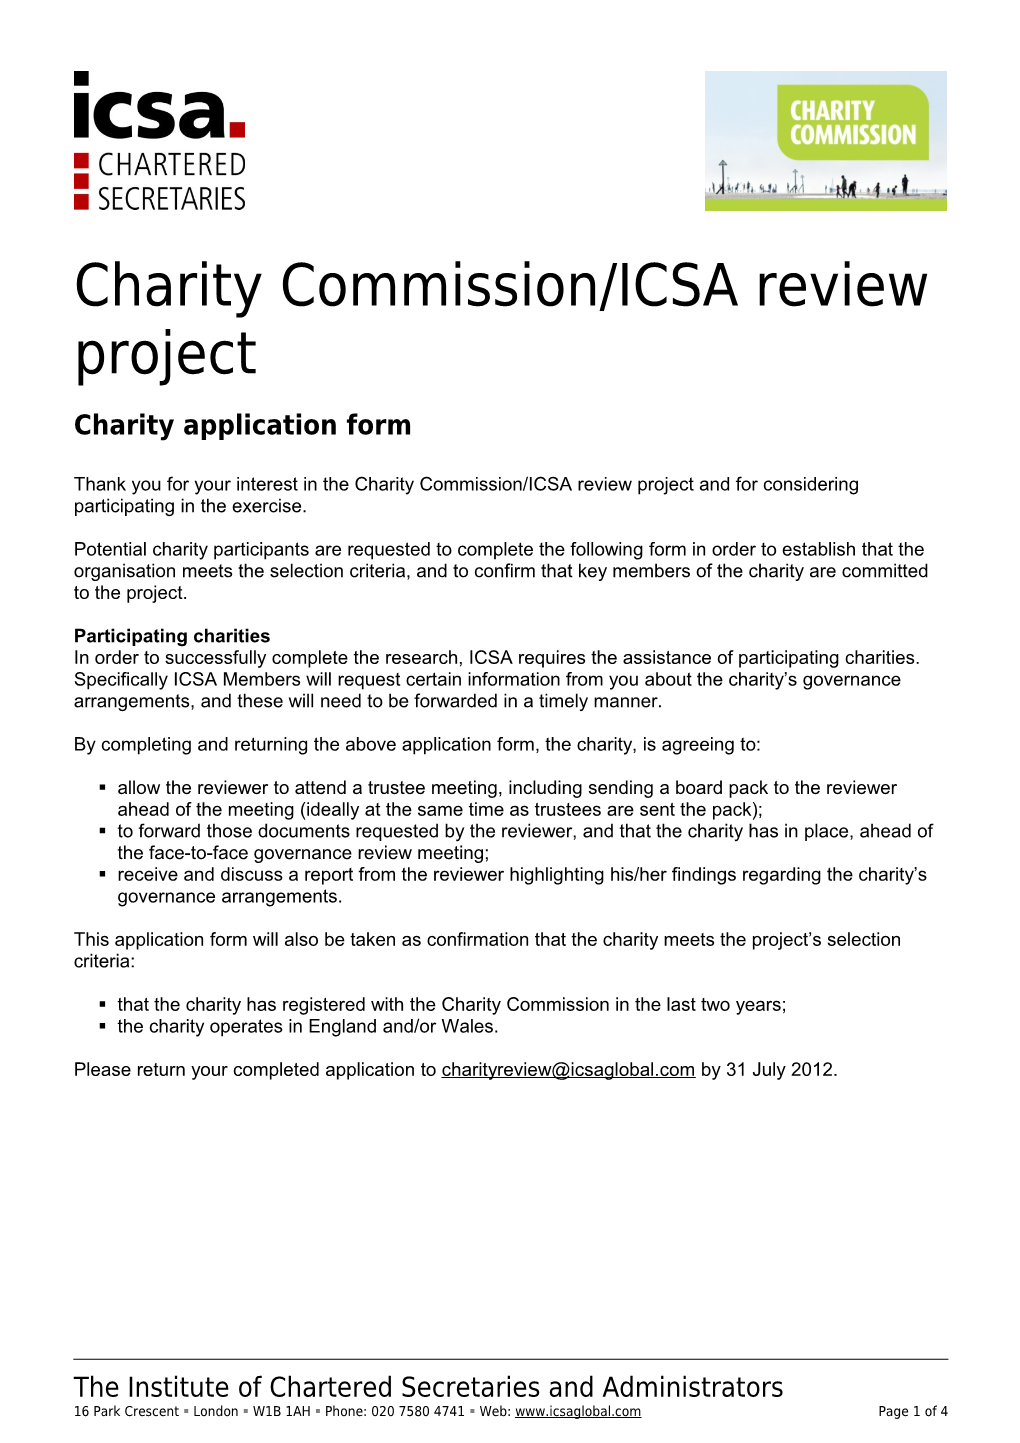 Charity Commission/ICSA Review Project